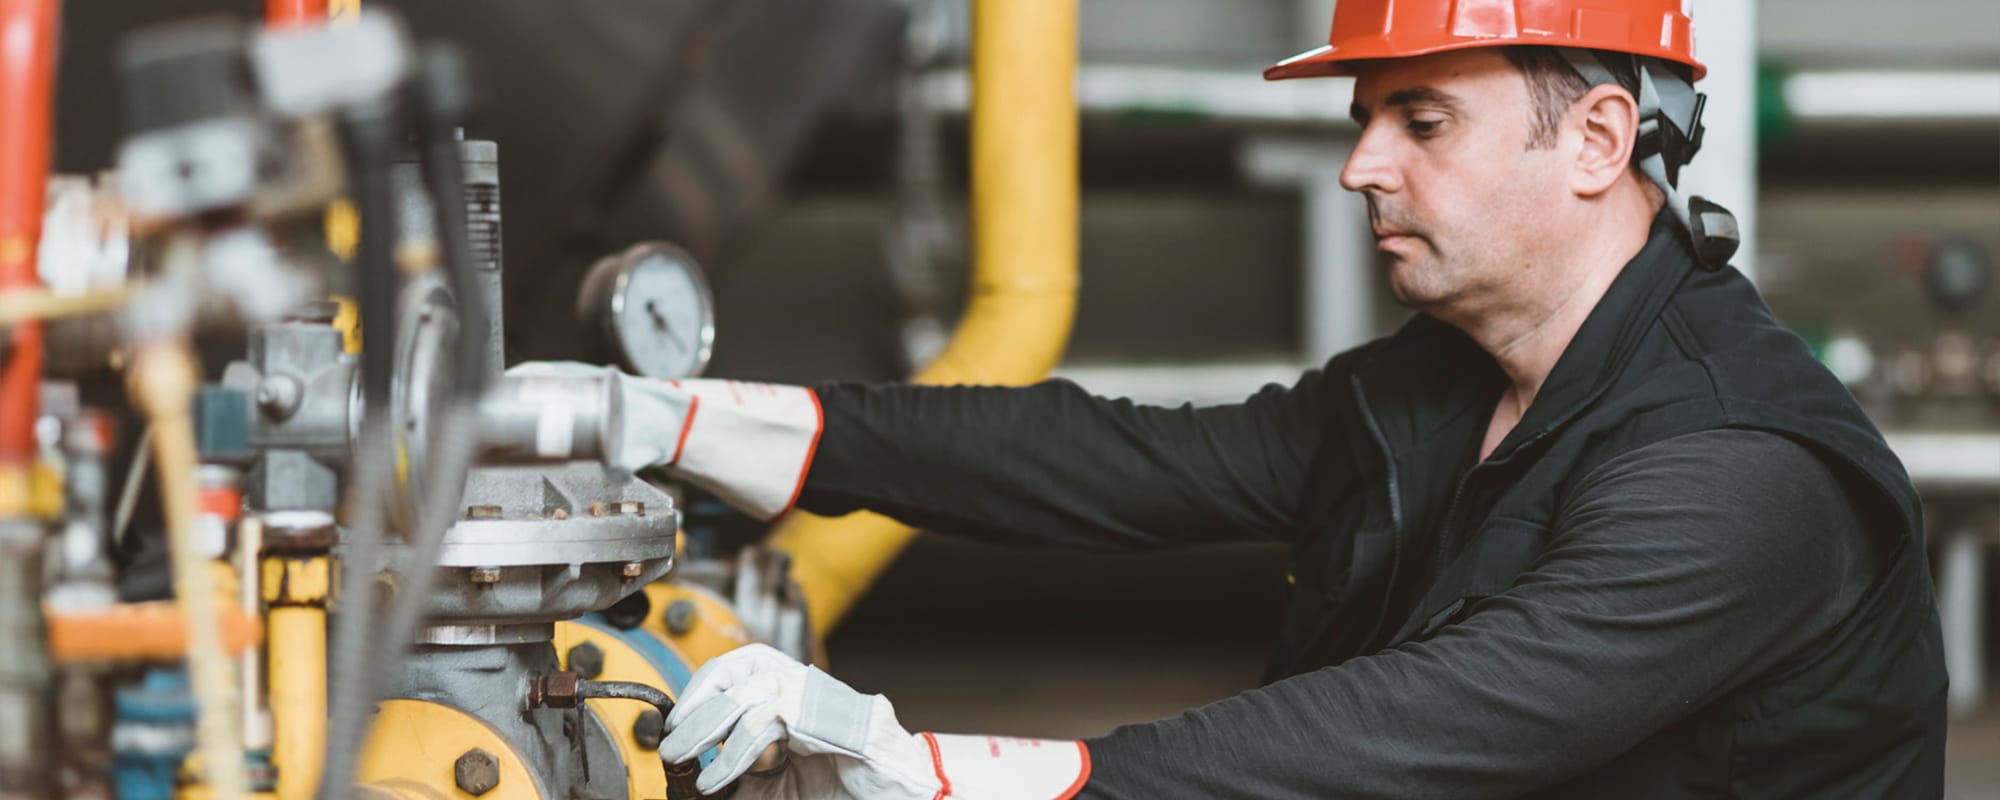 Condition Monitoring Solutions Support Predictive Maintenance